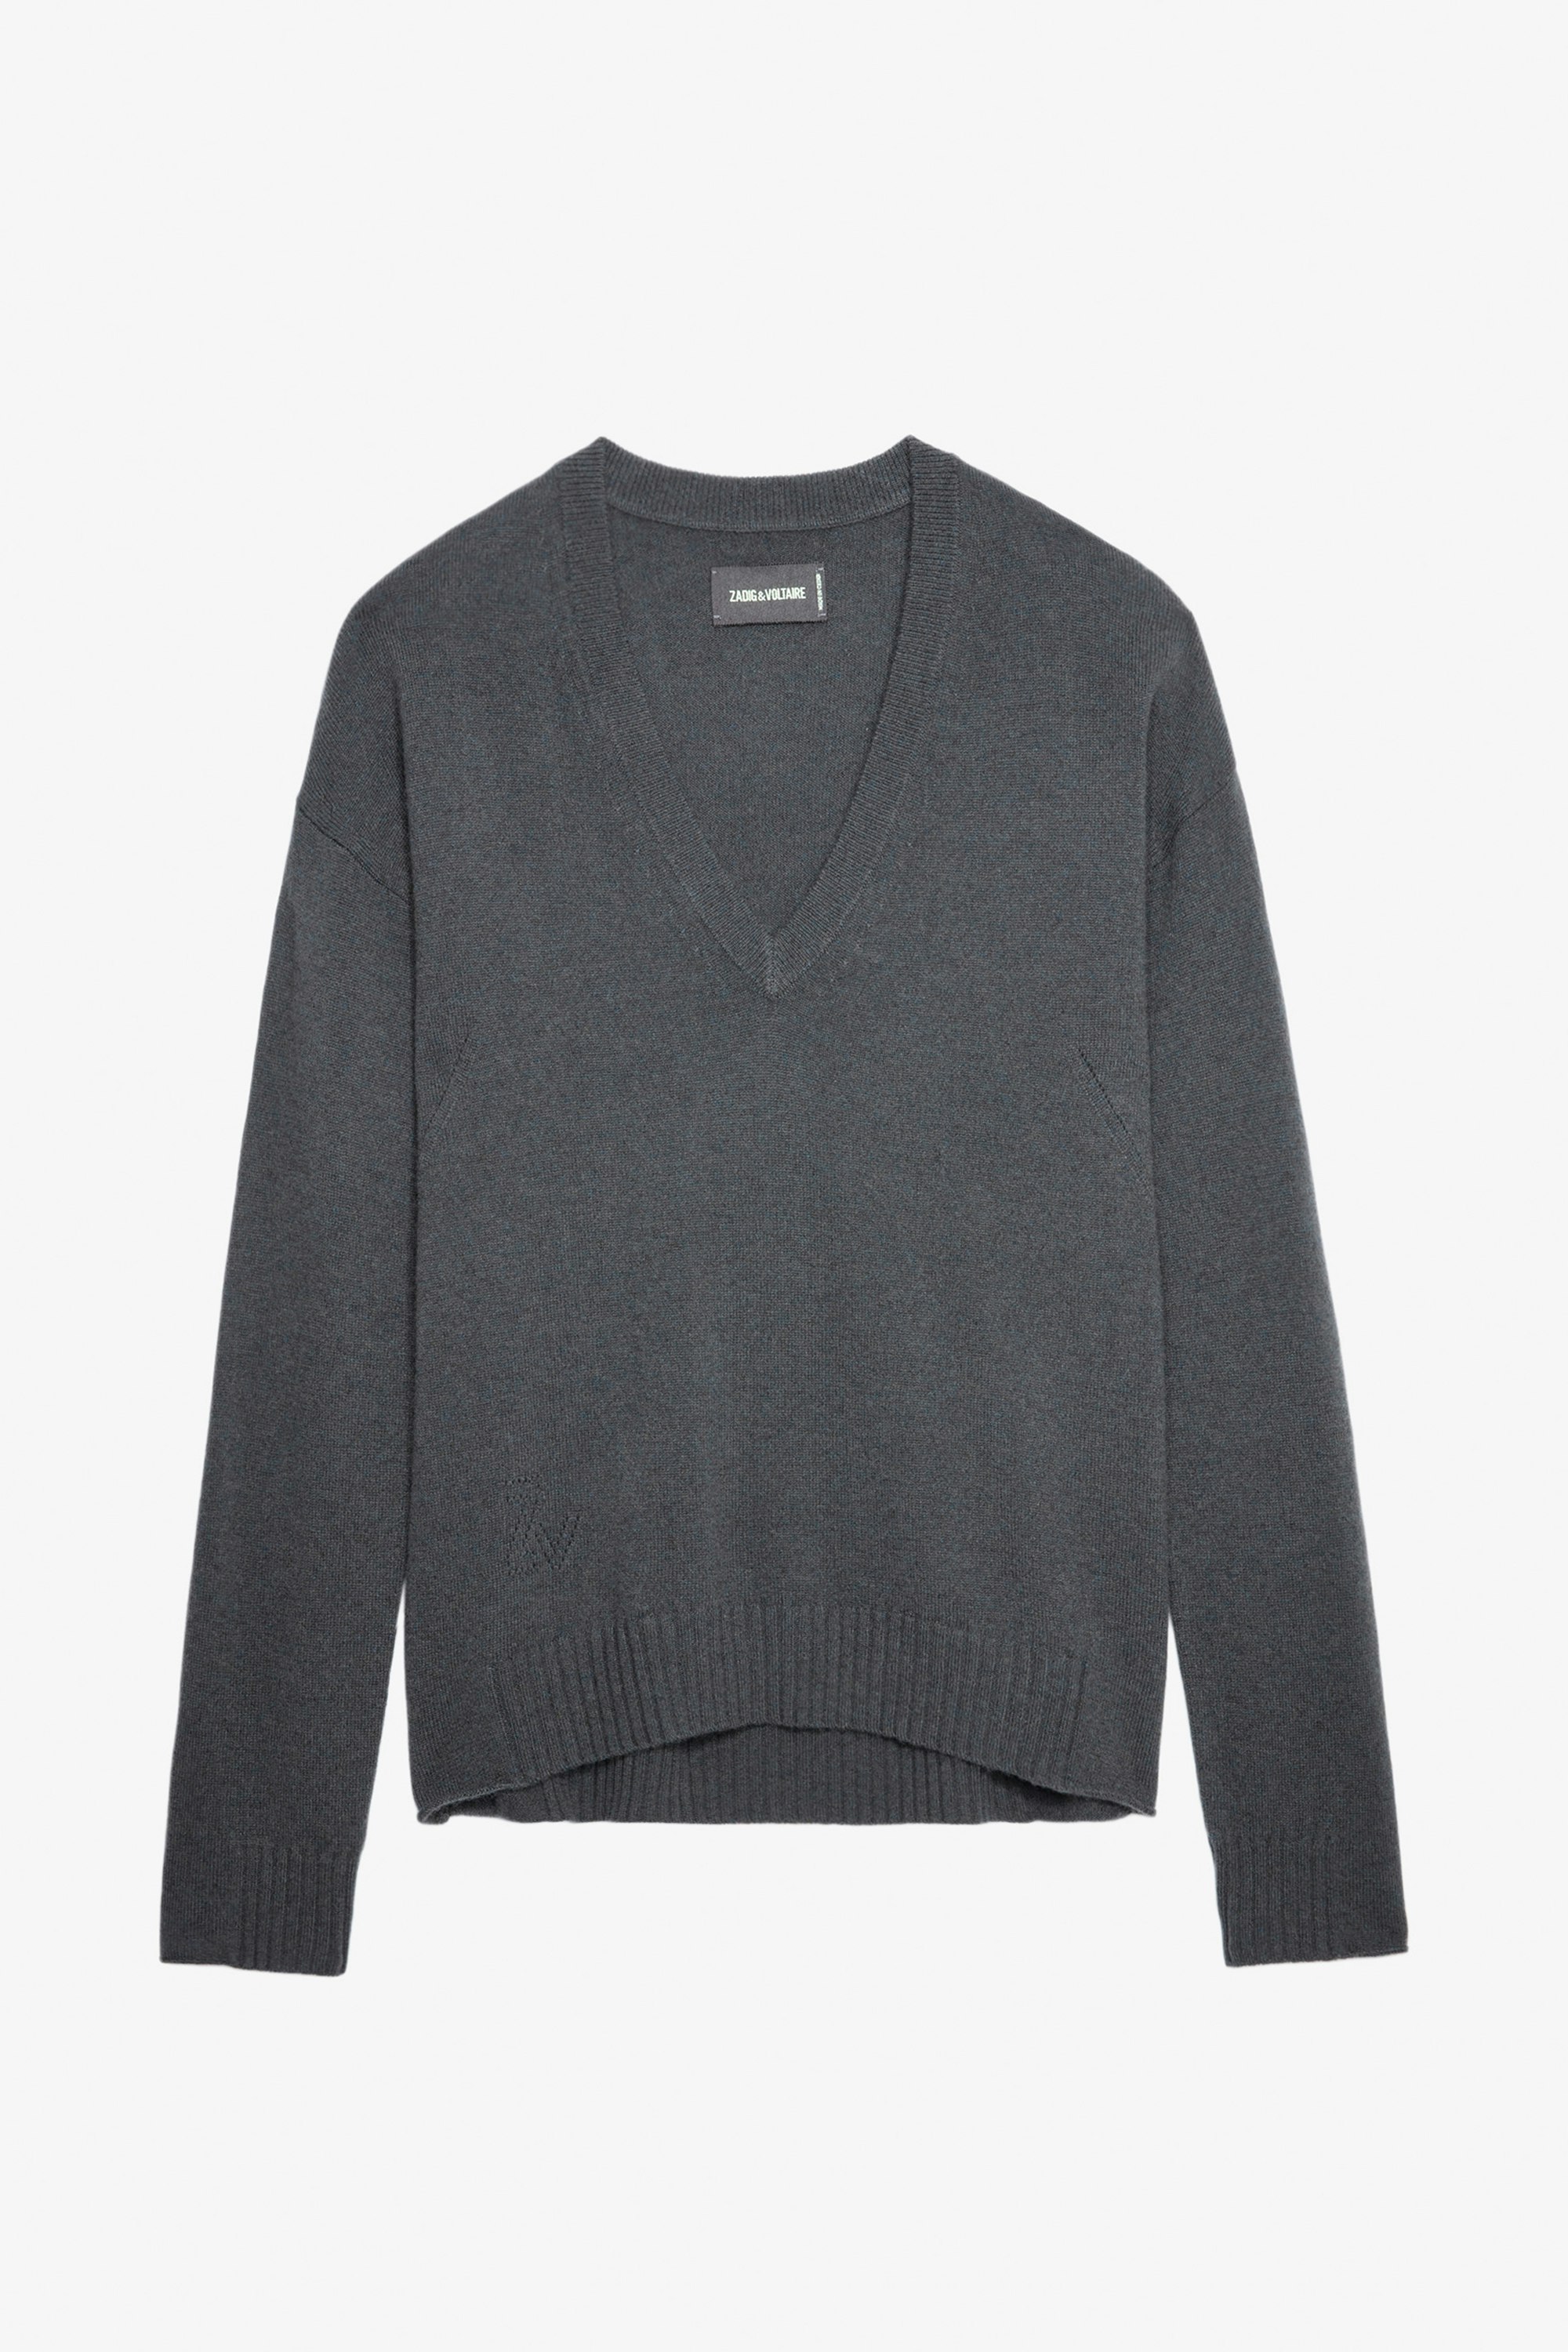 Vivi Patch Cashmere Jumper - Women’s grey cashmere jumper with star patches on the elbows.